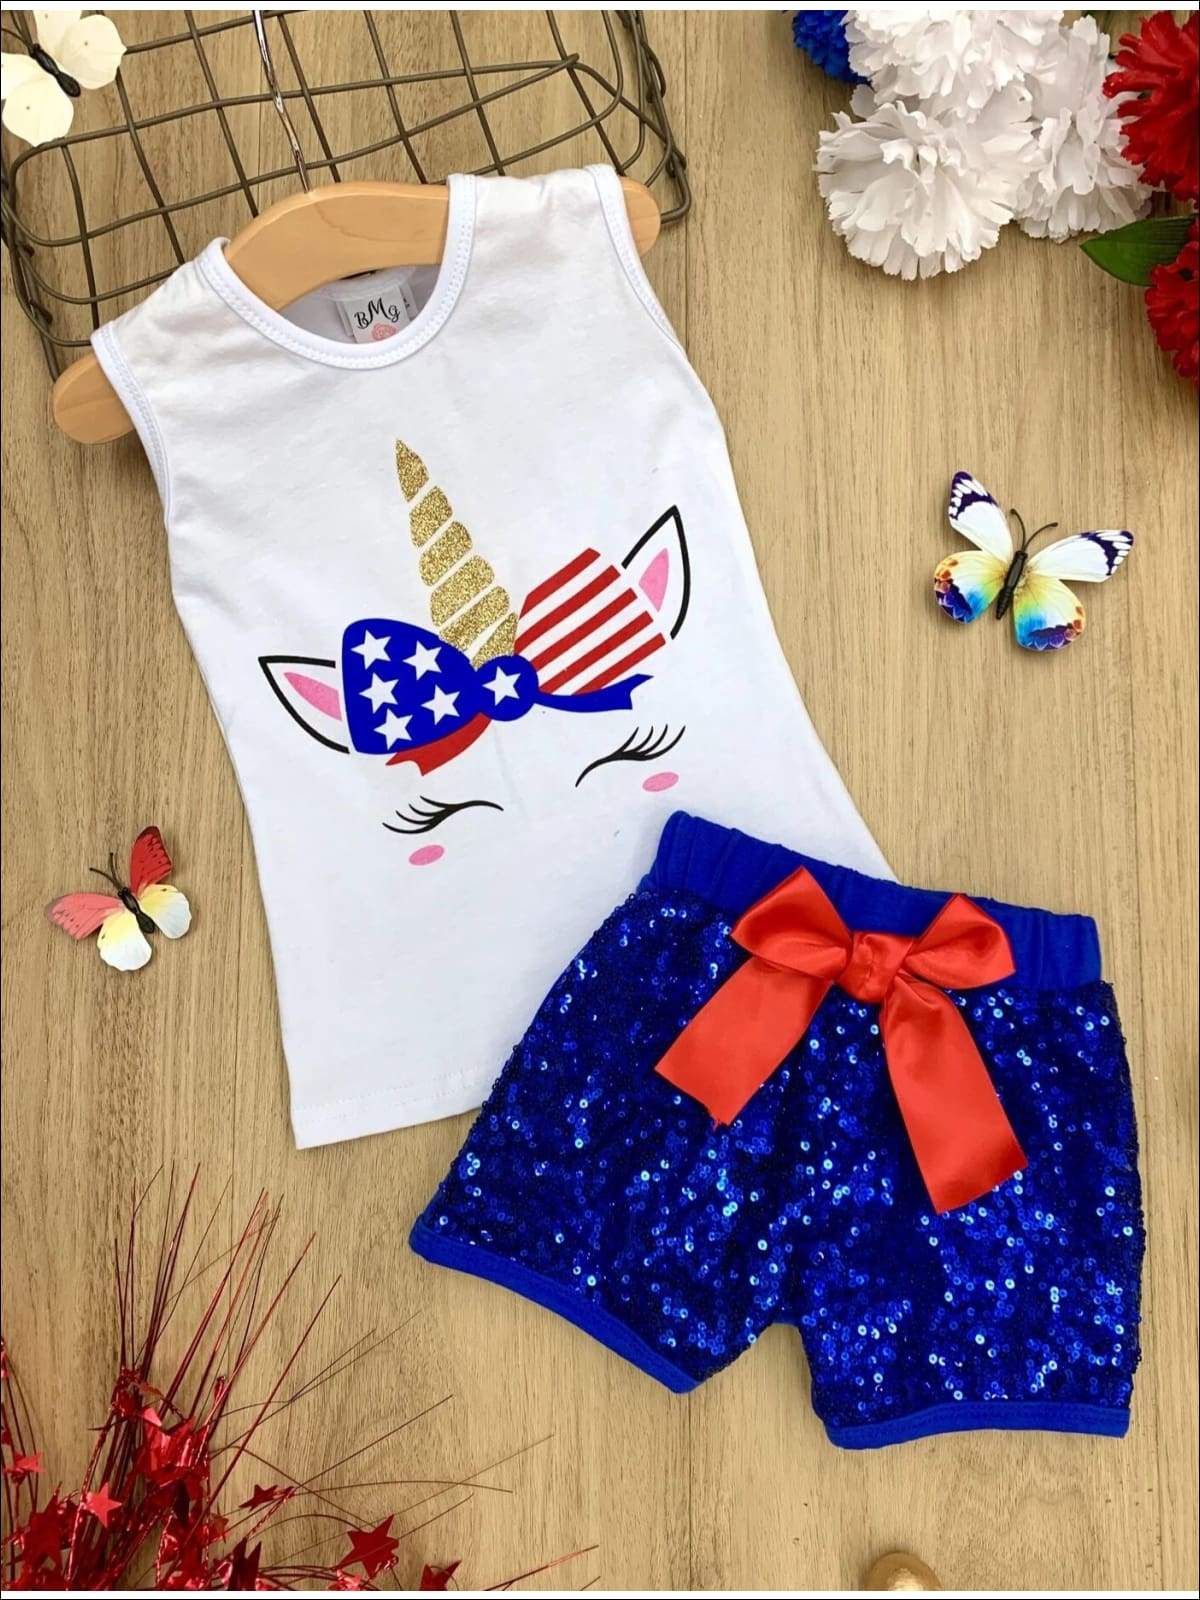 Girls 4th of July Themed Printed Top & Sequin Bow Shorts Set - Navy / XS-2T - Girls 4th of July Set